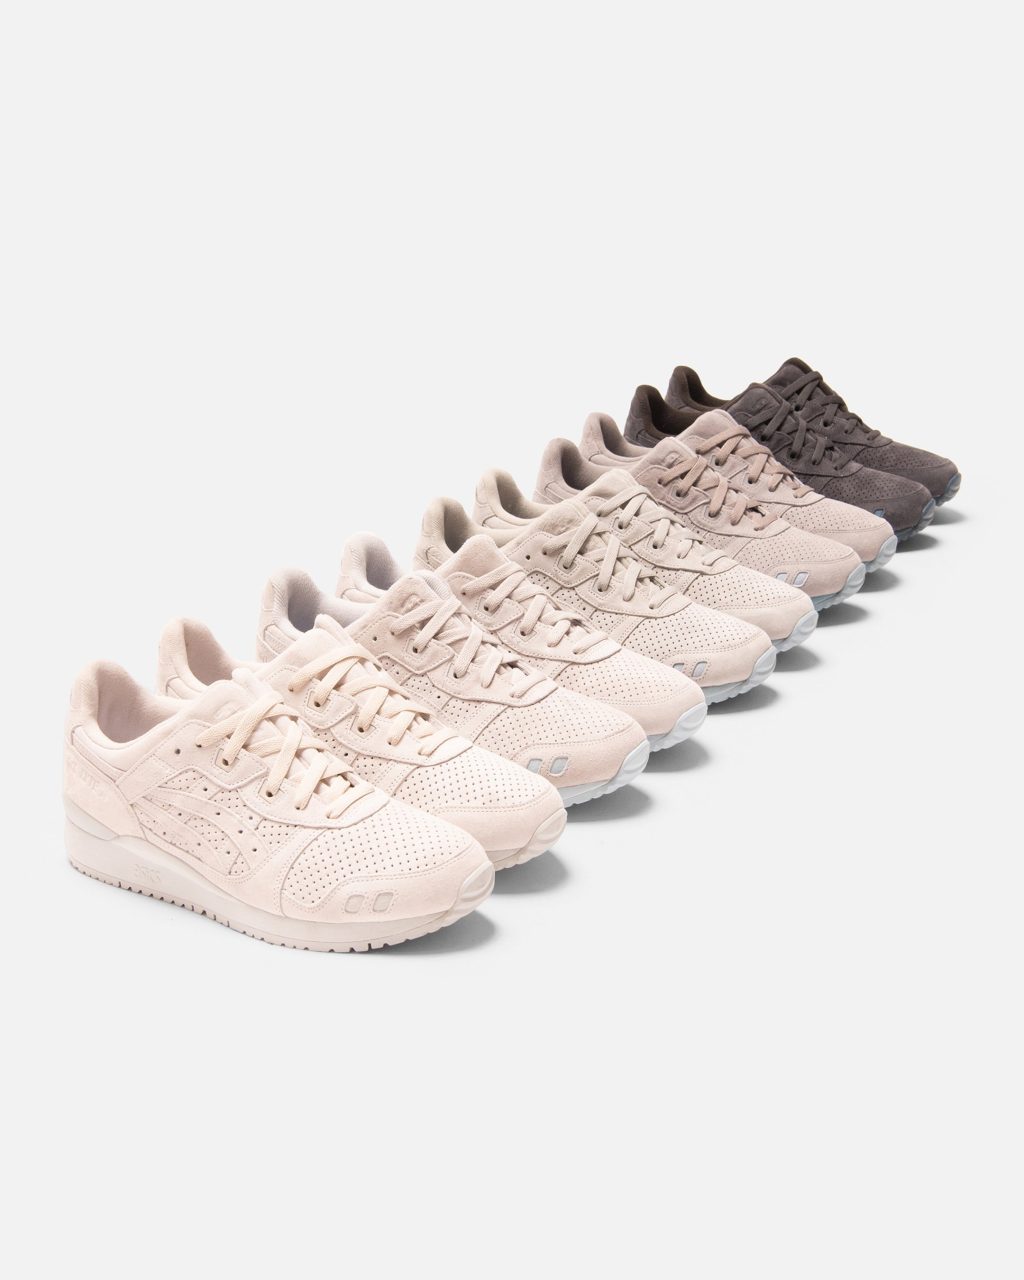 kith-ronnie-fieg-for-asics-the-palette-release-20201127